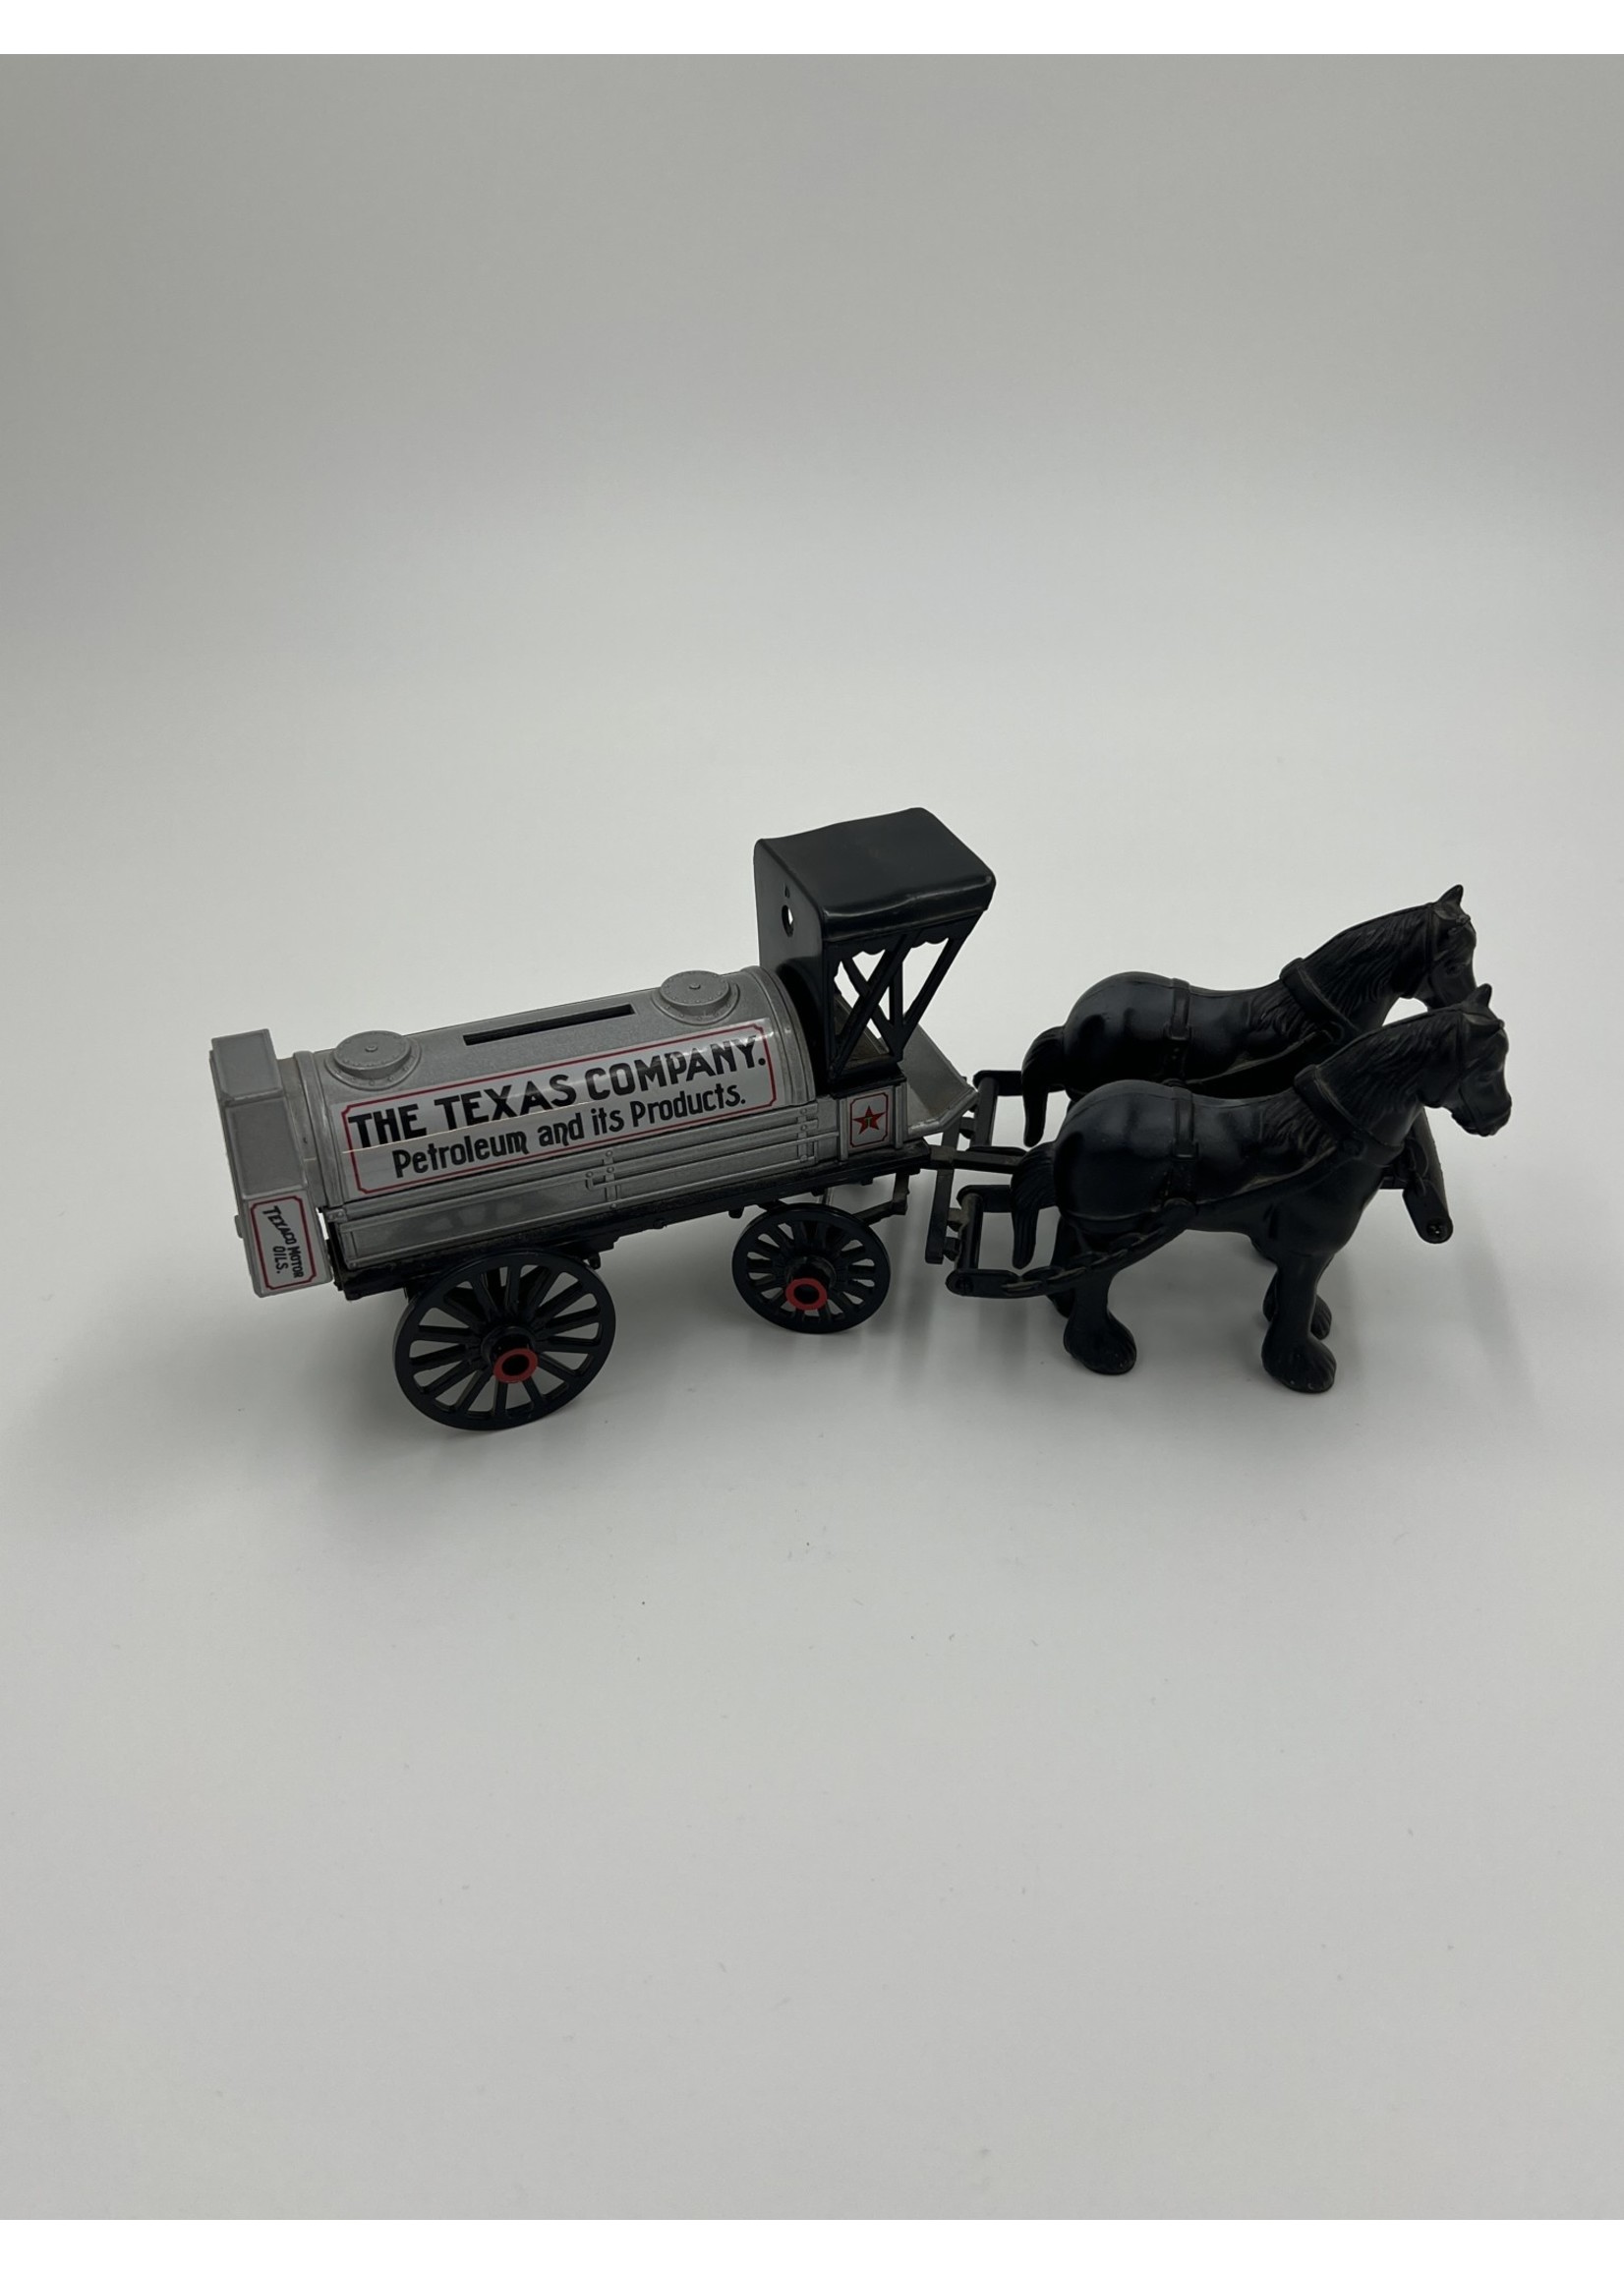 Other Things ERTL The Texas Company Metal Coach Bank